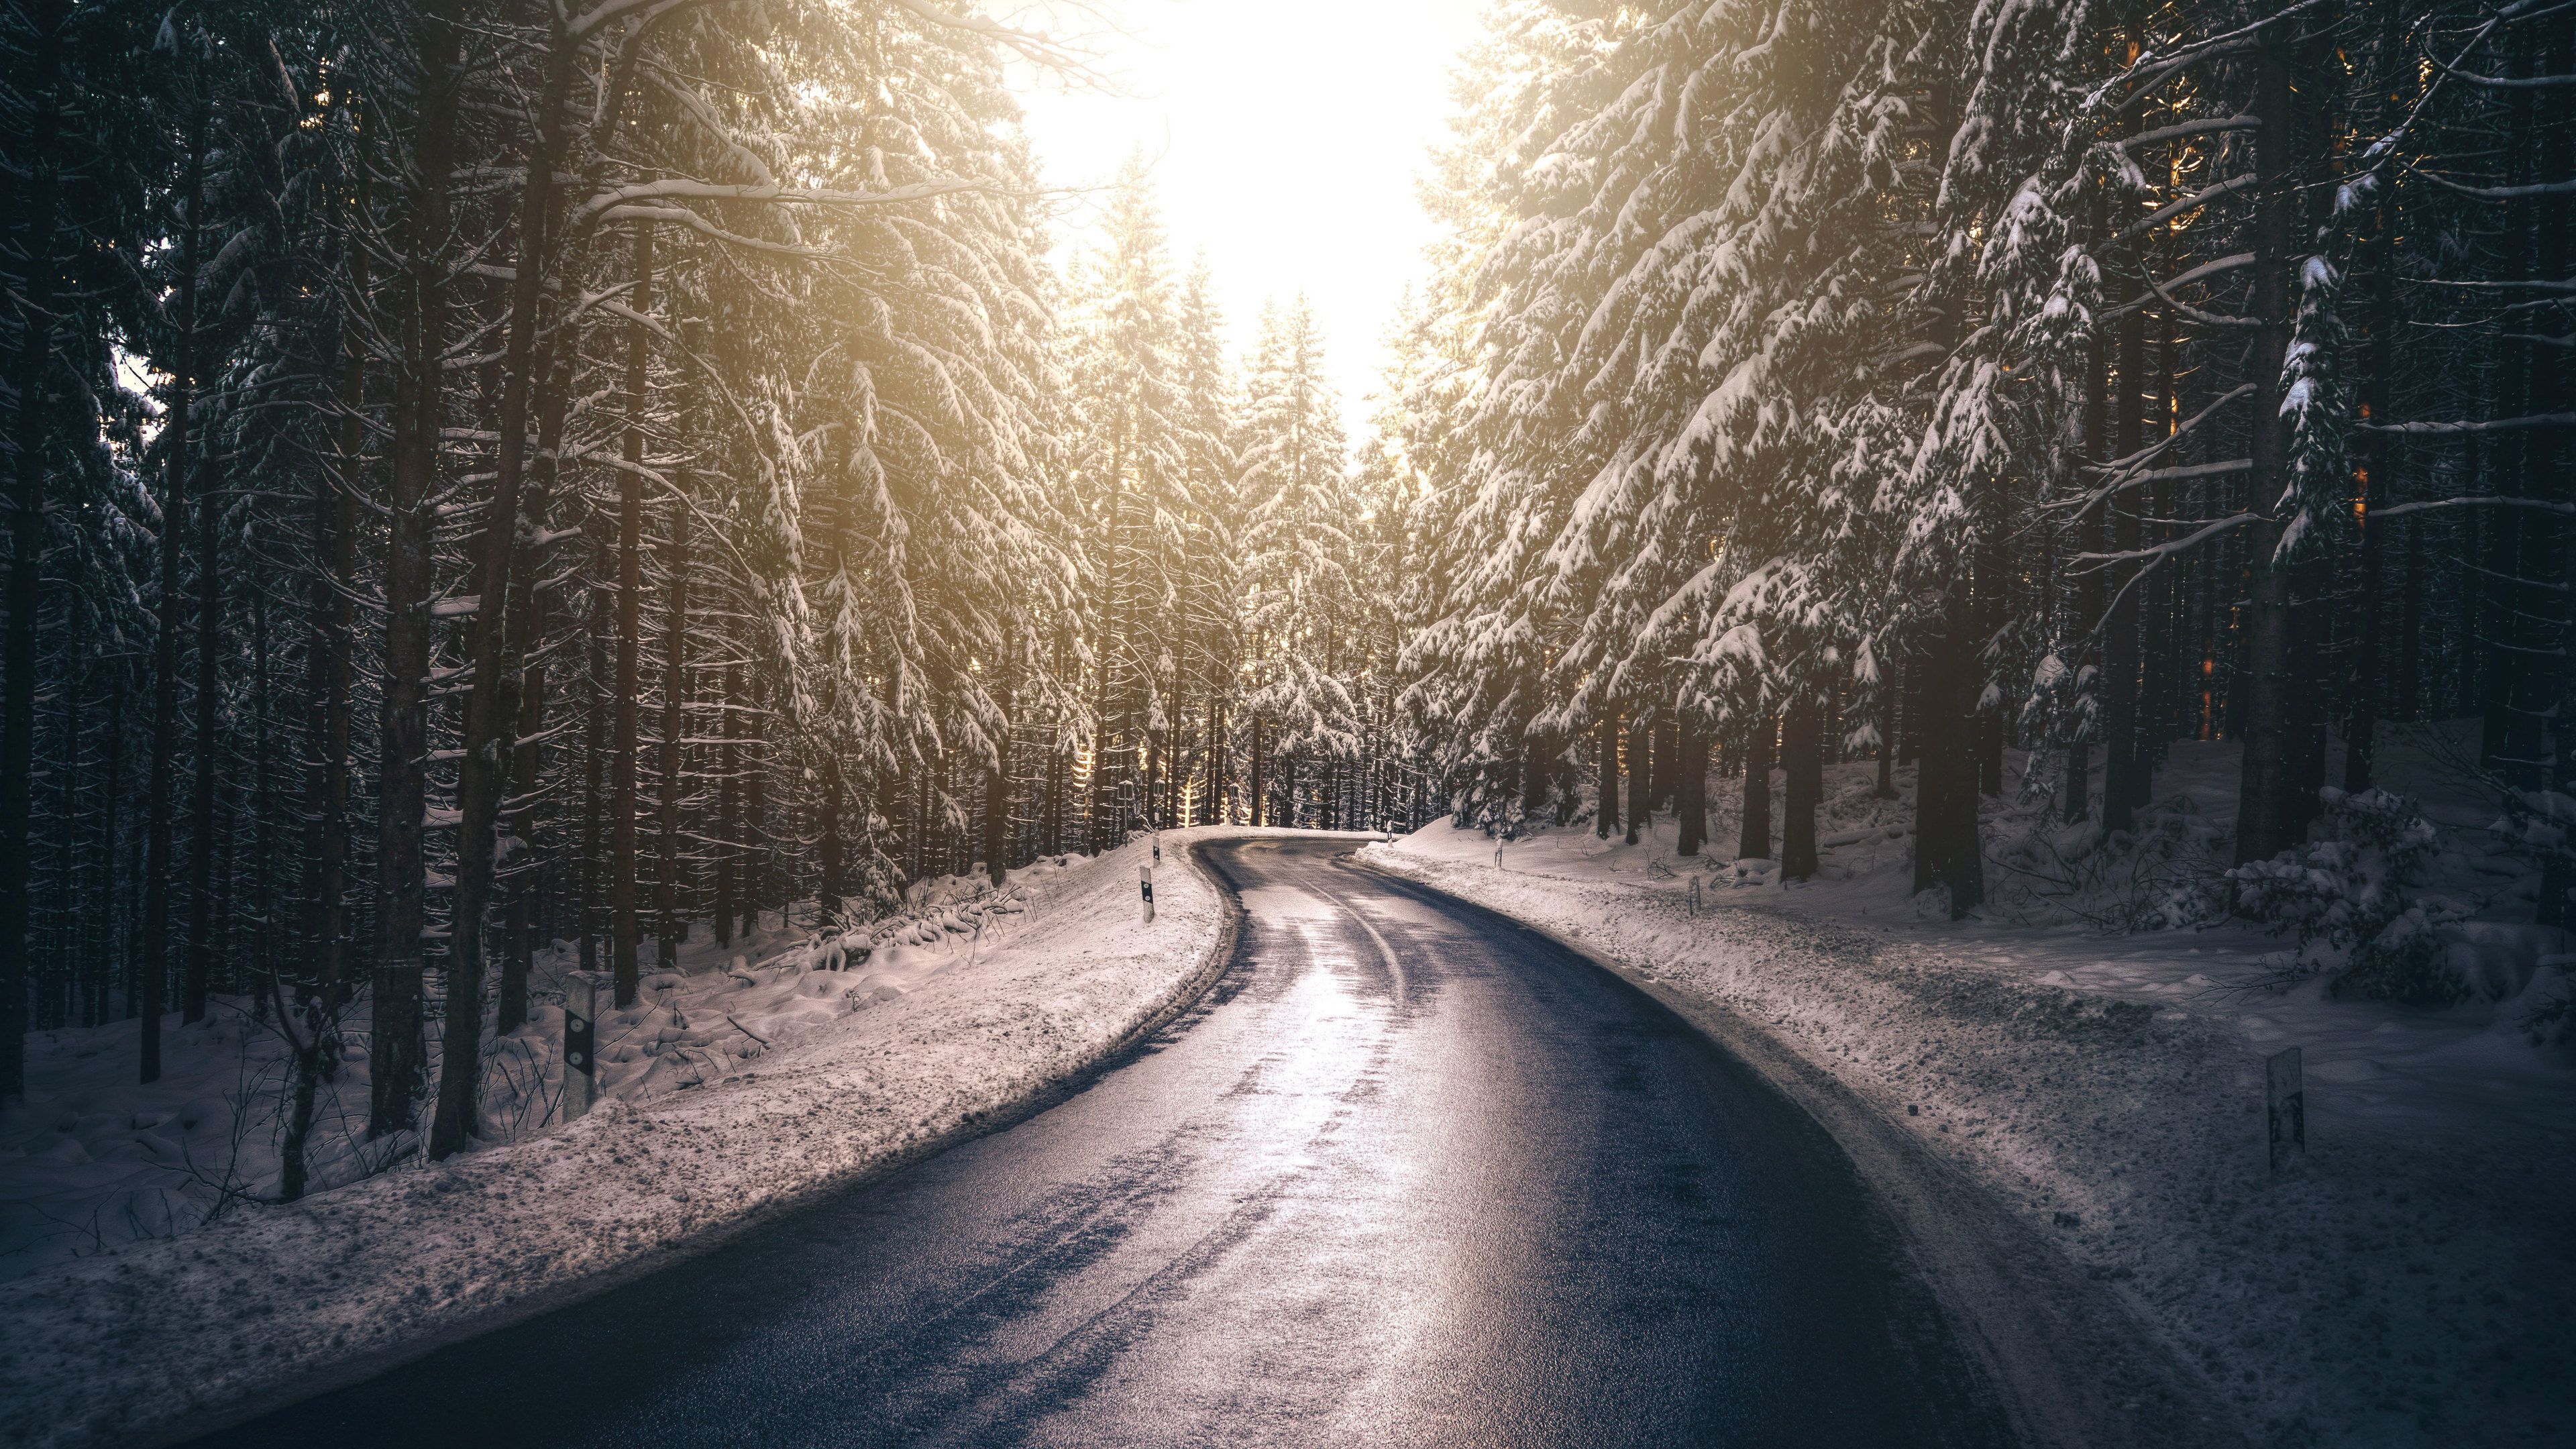 Wallpaper 4k Forest Nature Road Snow Tree Winter 4k 4k Wallpaper, 5k Wallpaper, Hd Wallpaper, Nature Wallpaper, Road Wallpaper, Snow Wallpaper, Trees Wallpaper, Winter Wallpaper